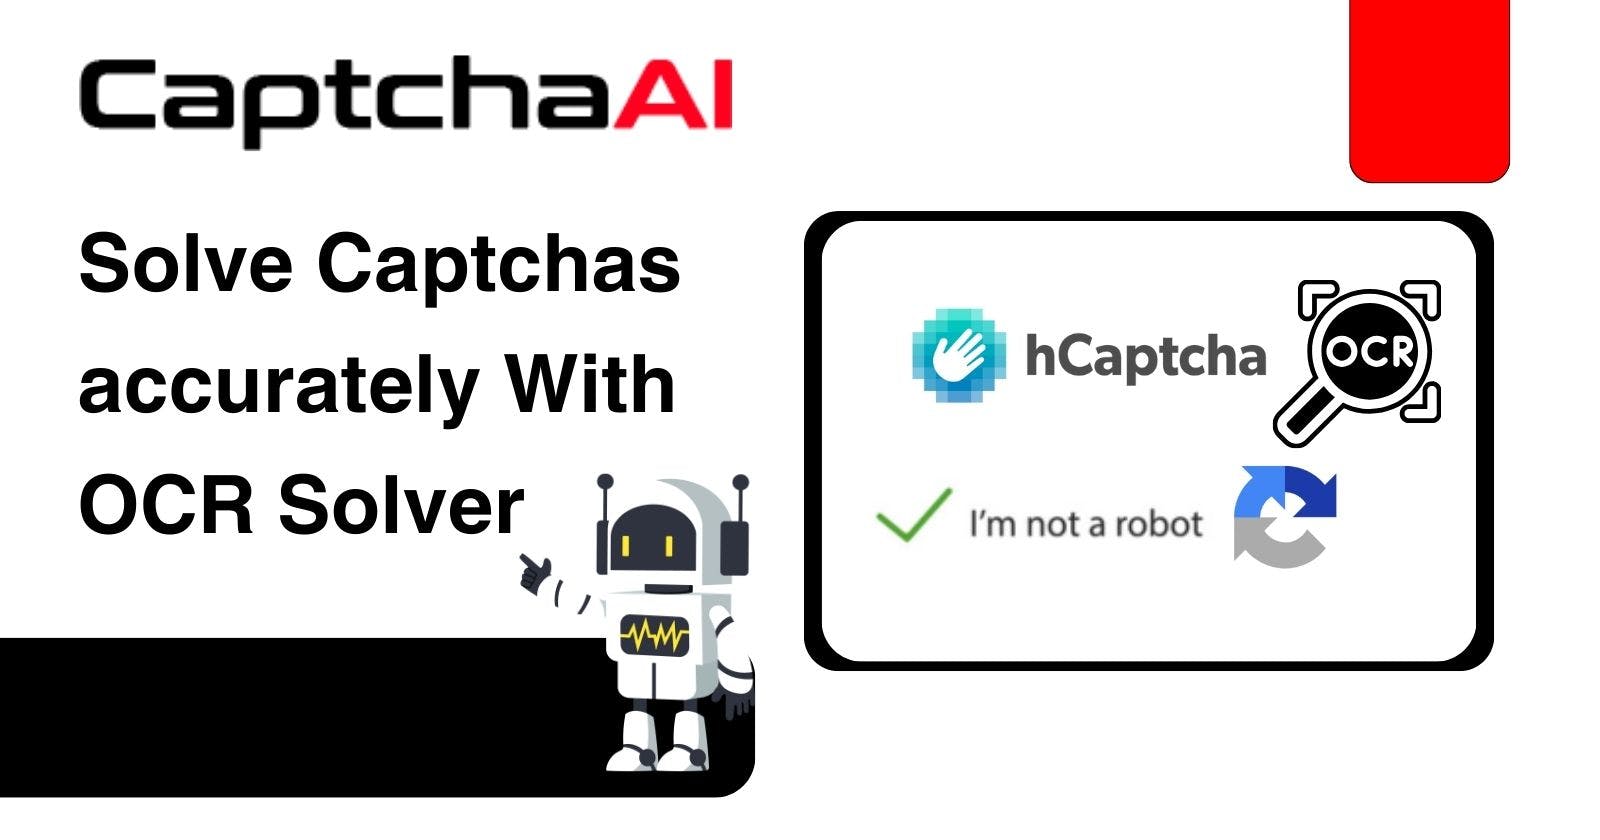 How to solve captchas accurately With OCR Solver?